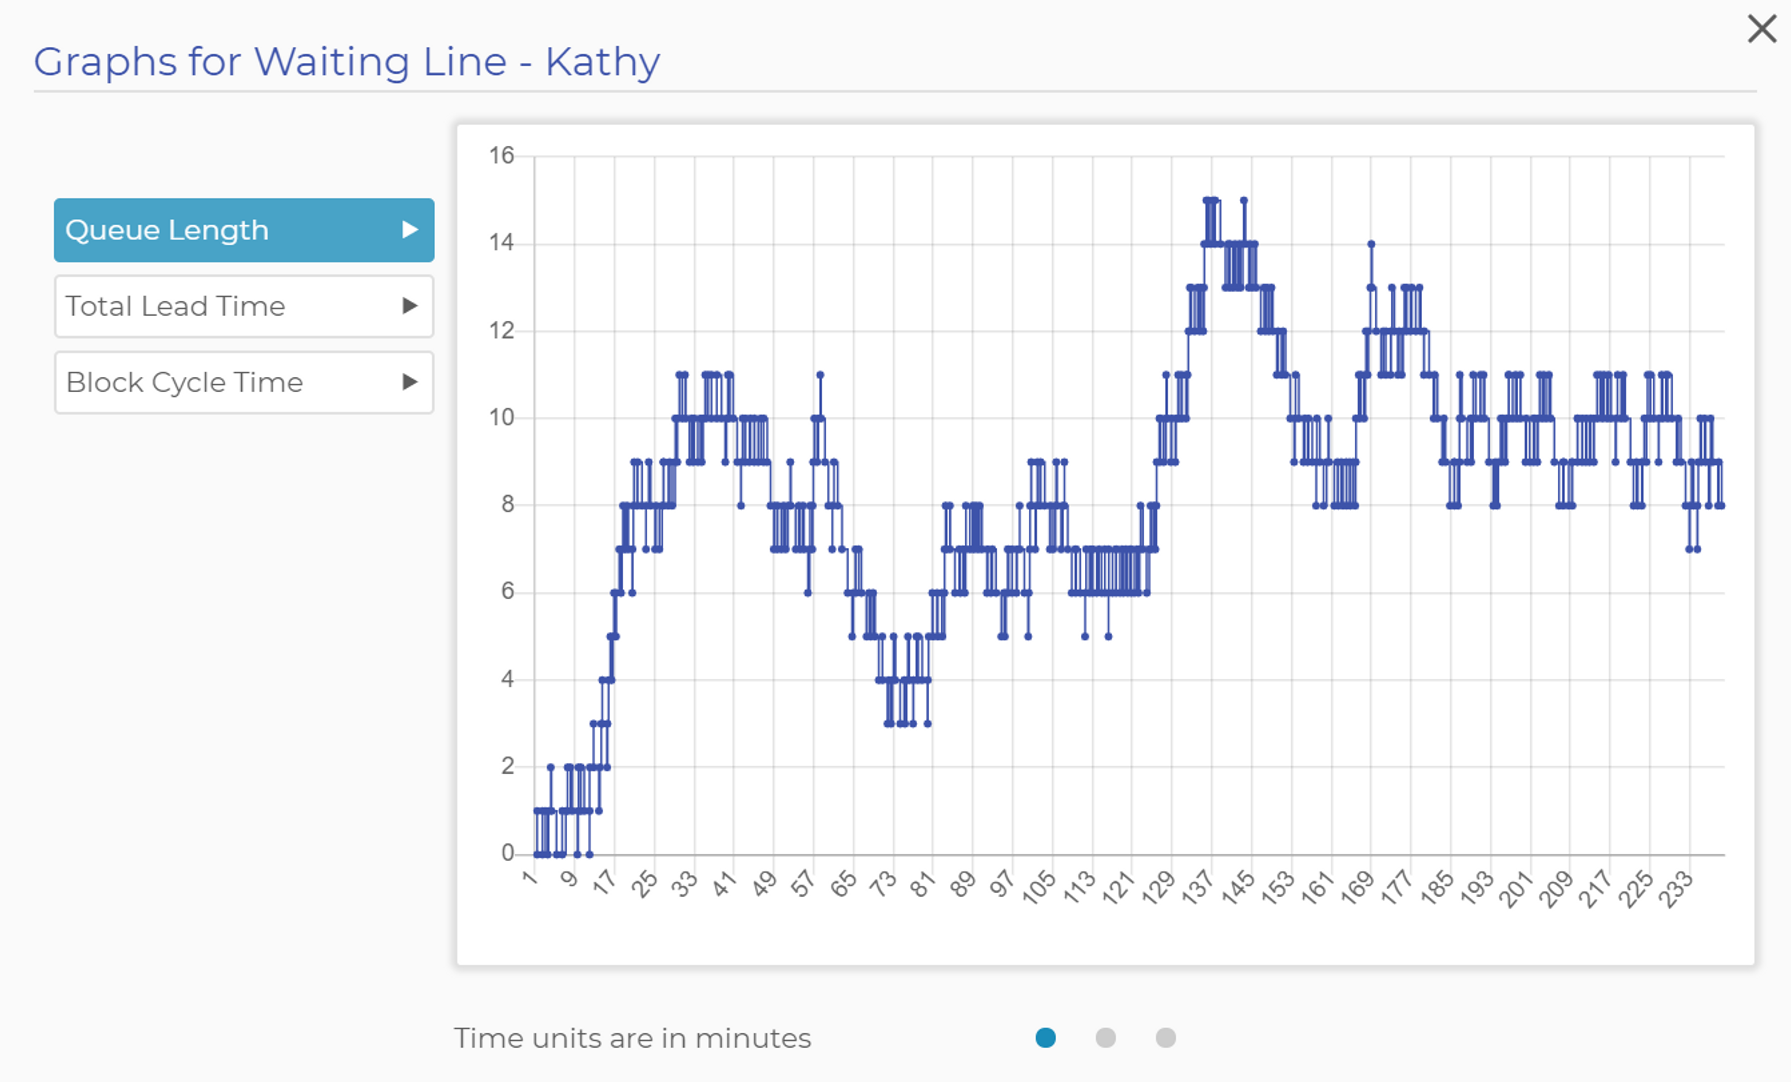 Kathy's Waiting Line Graph